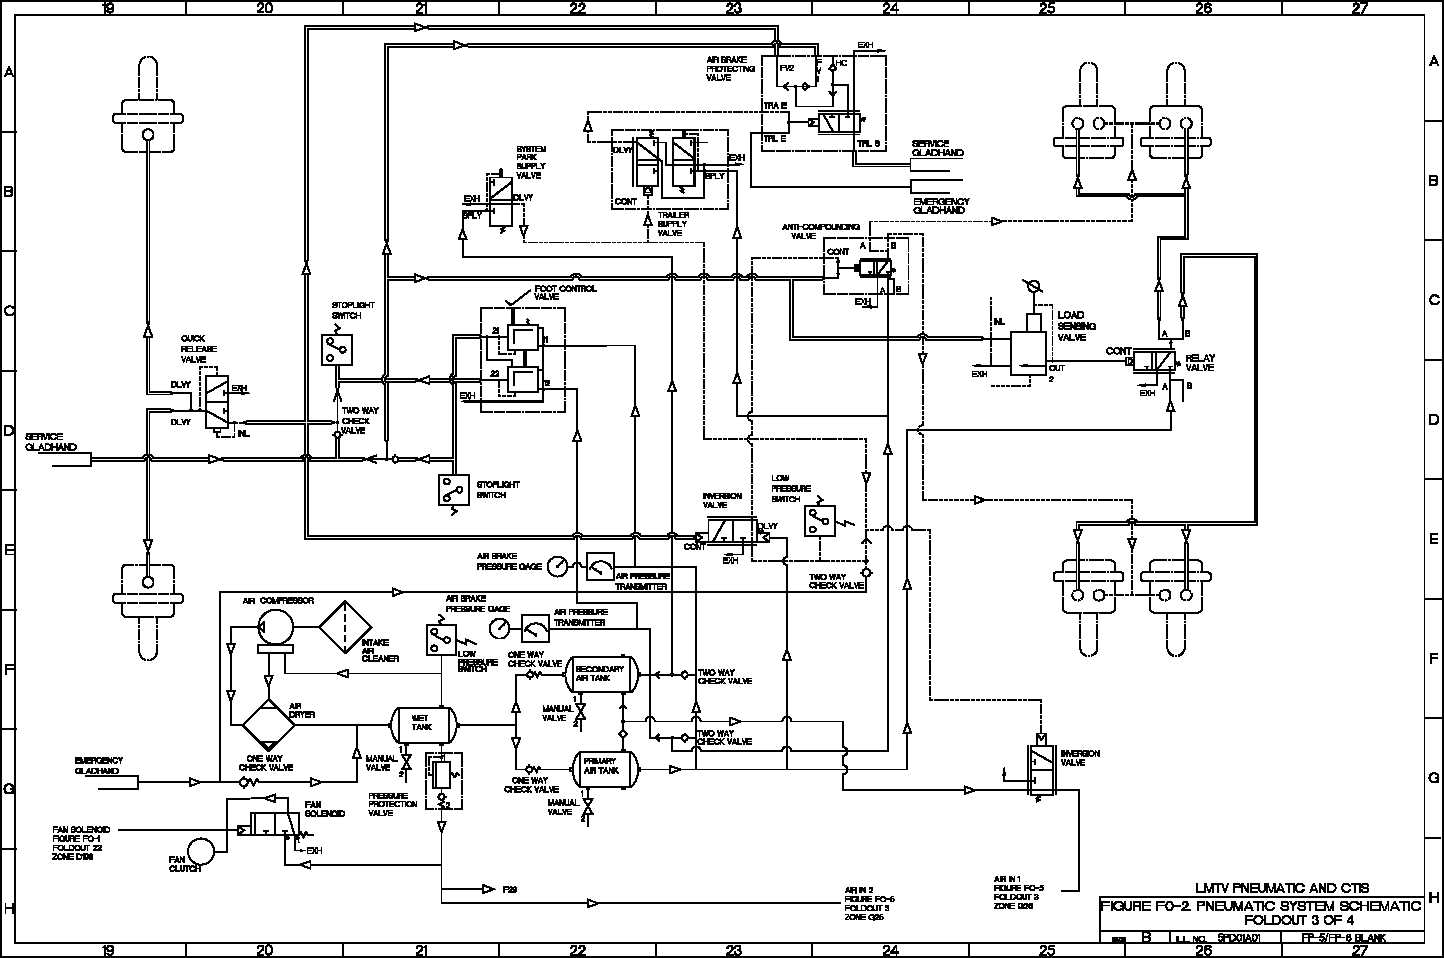 Pneumatic System Schematic